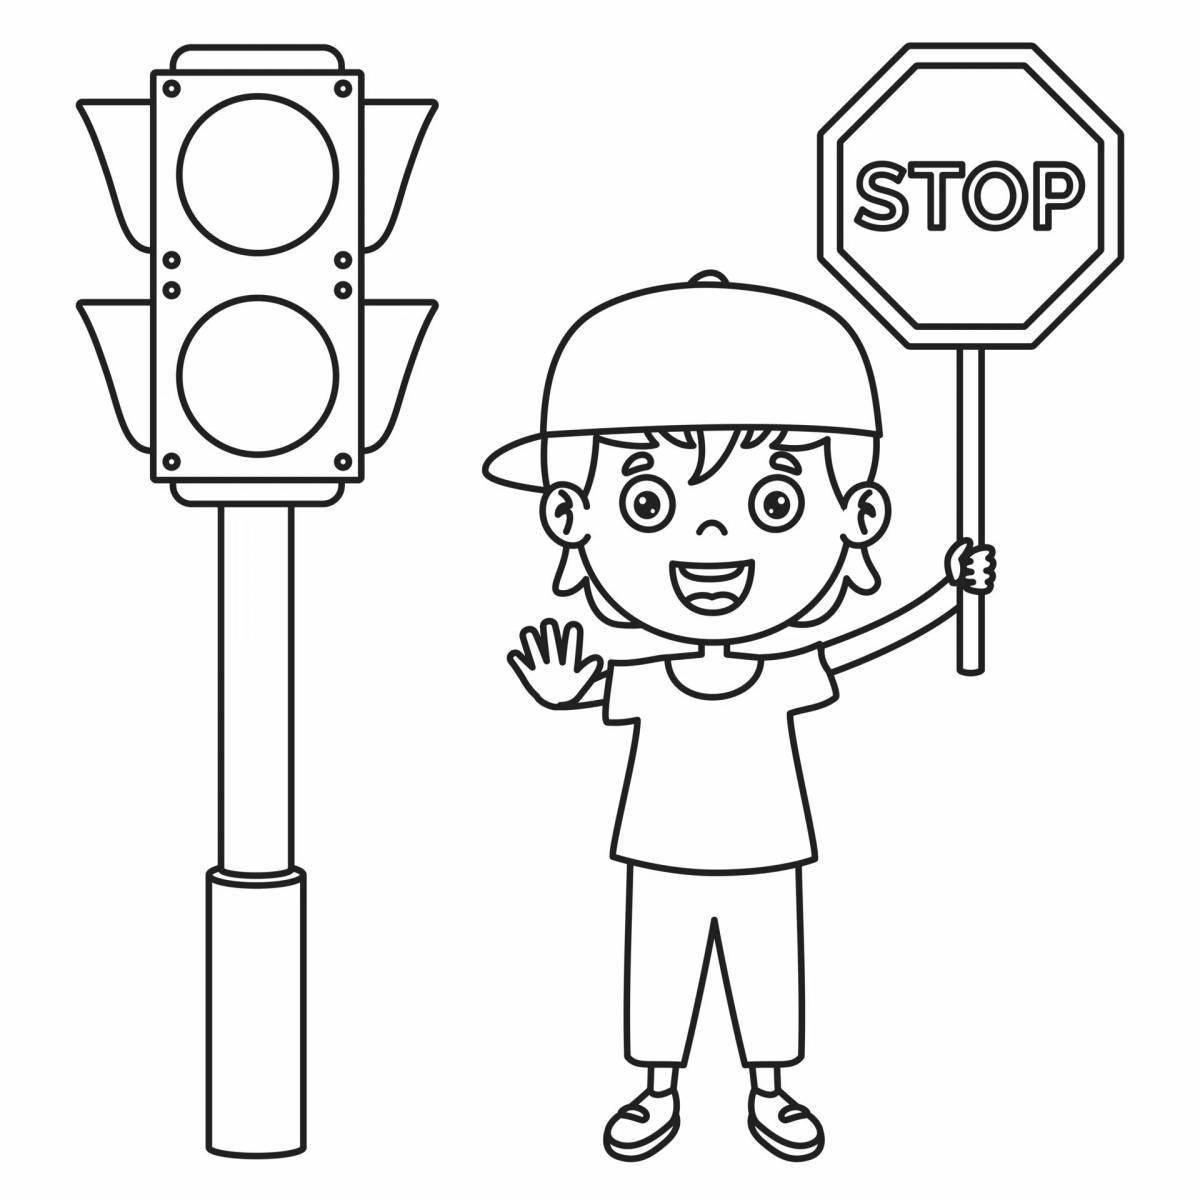 Playful traffic light coloring page for kids